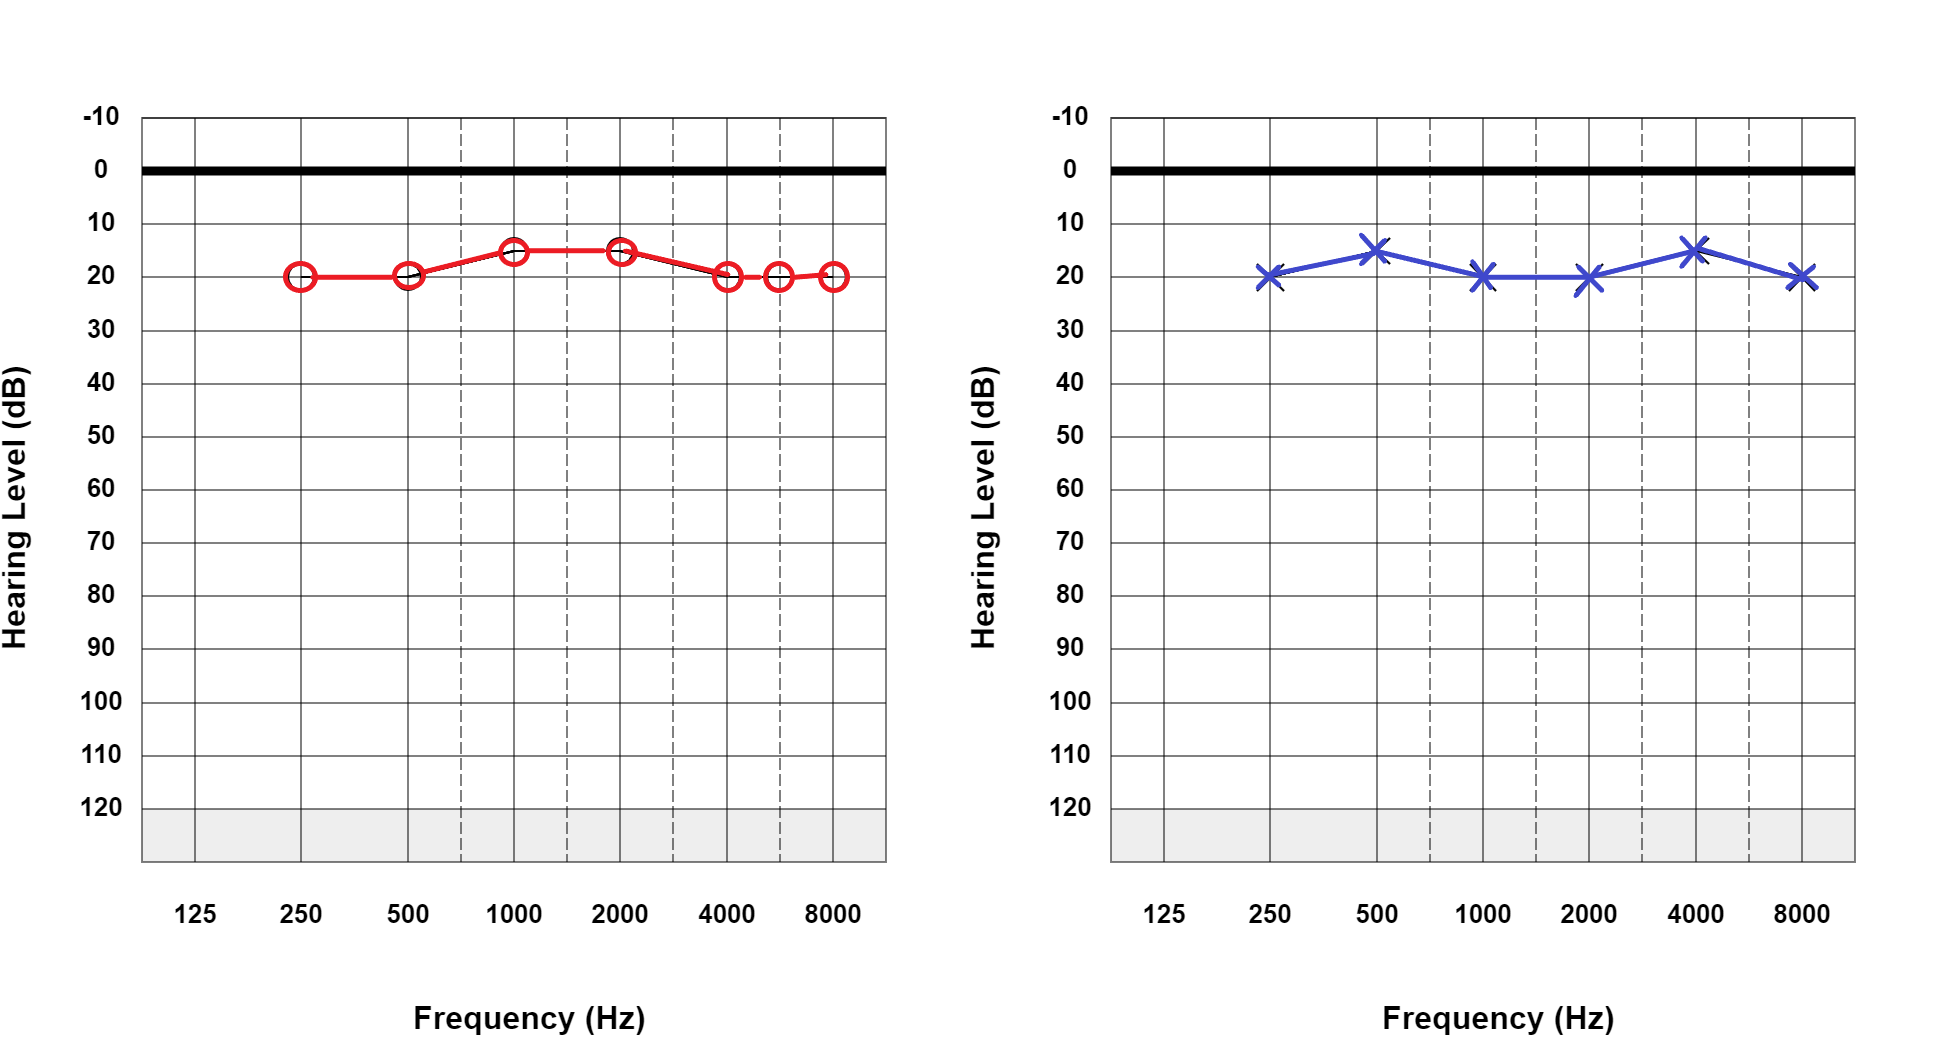 Pure tone audiogram showing normal hearing thresholds. This does not require masking.